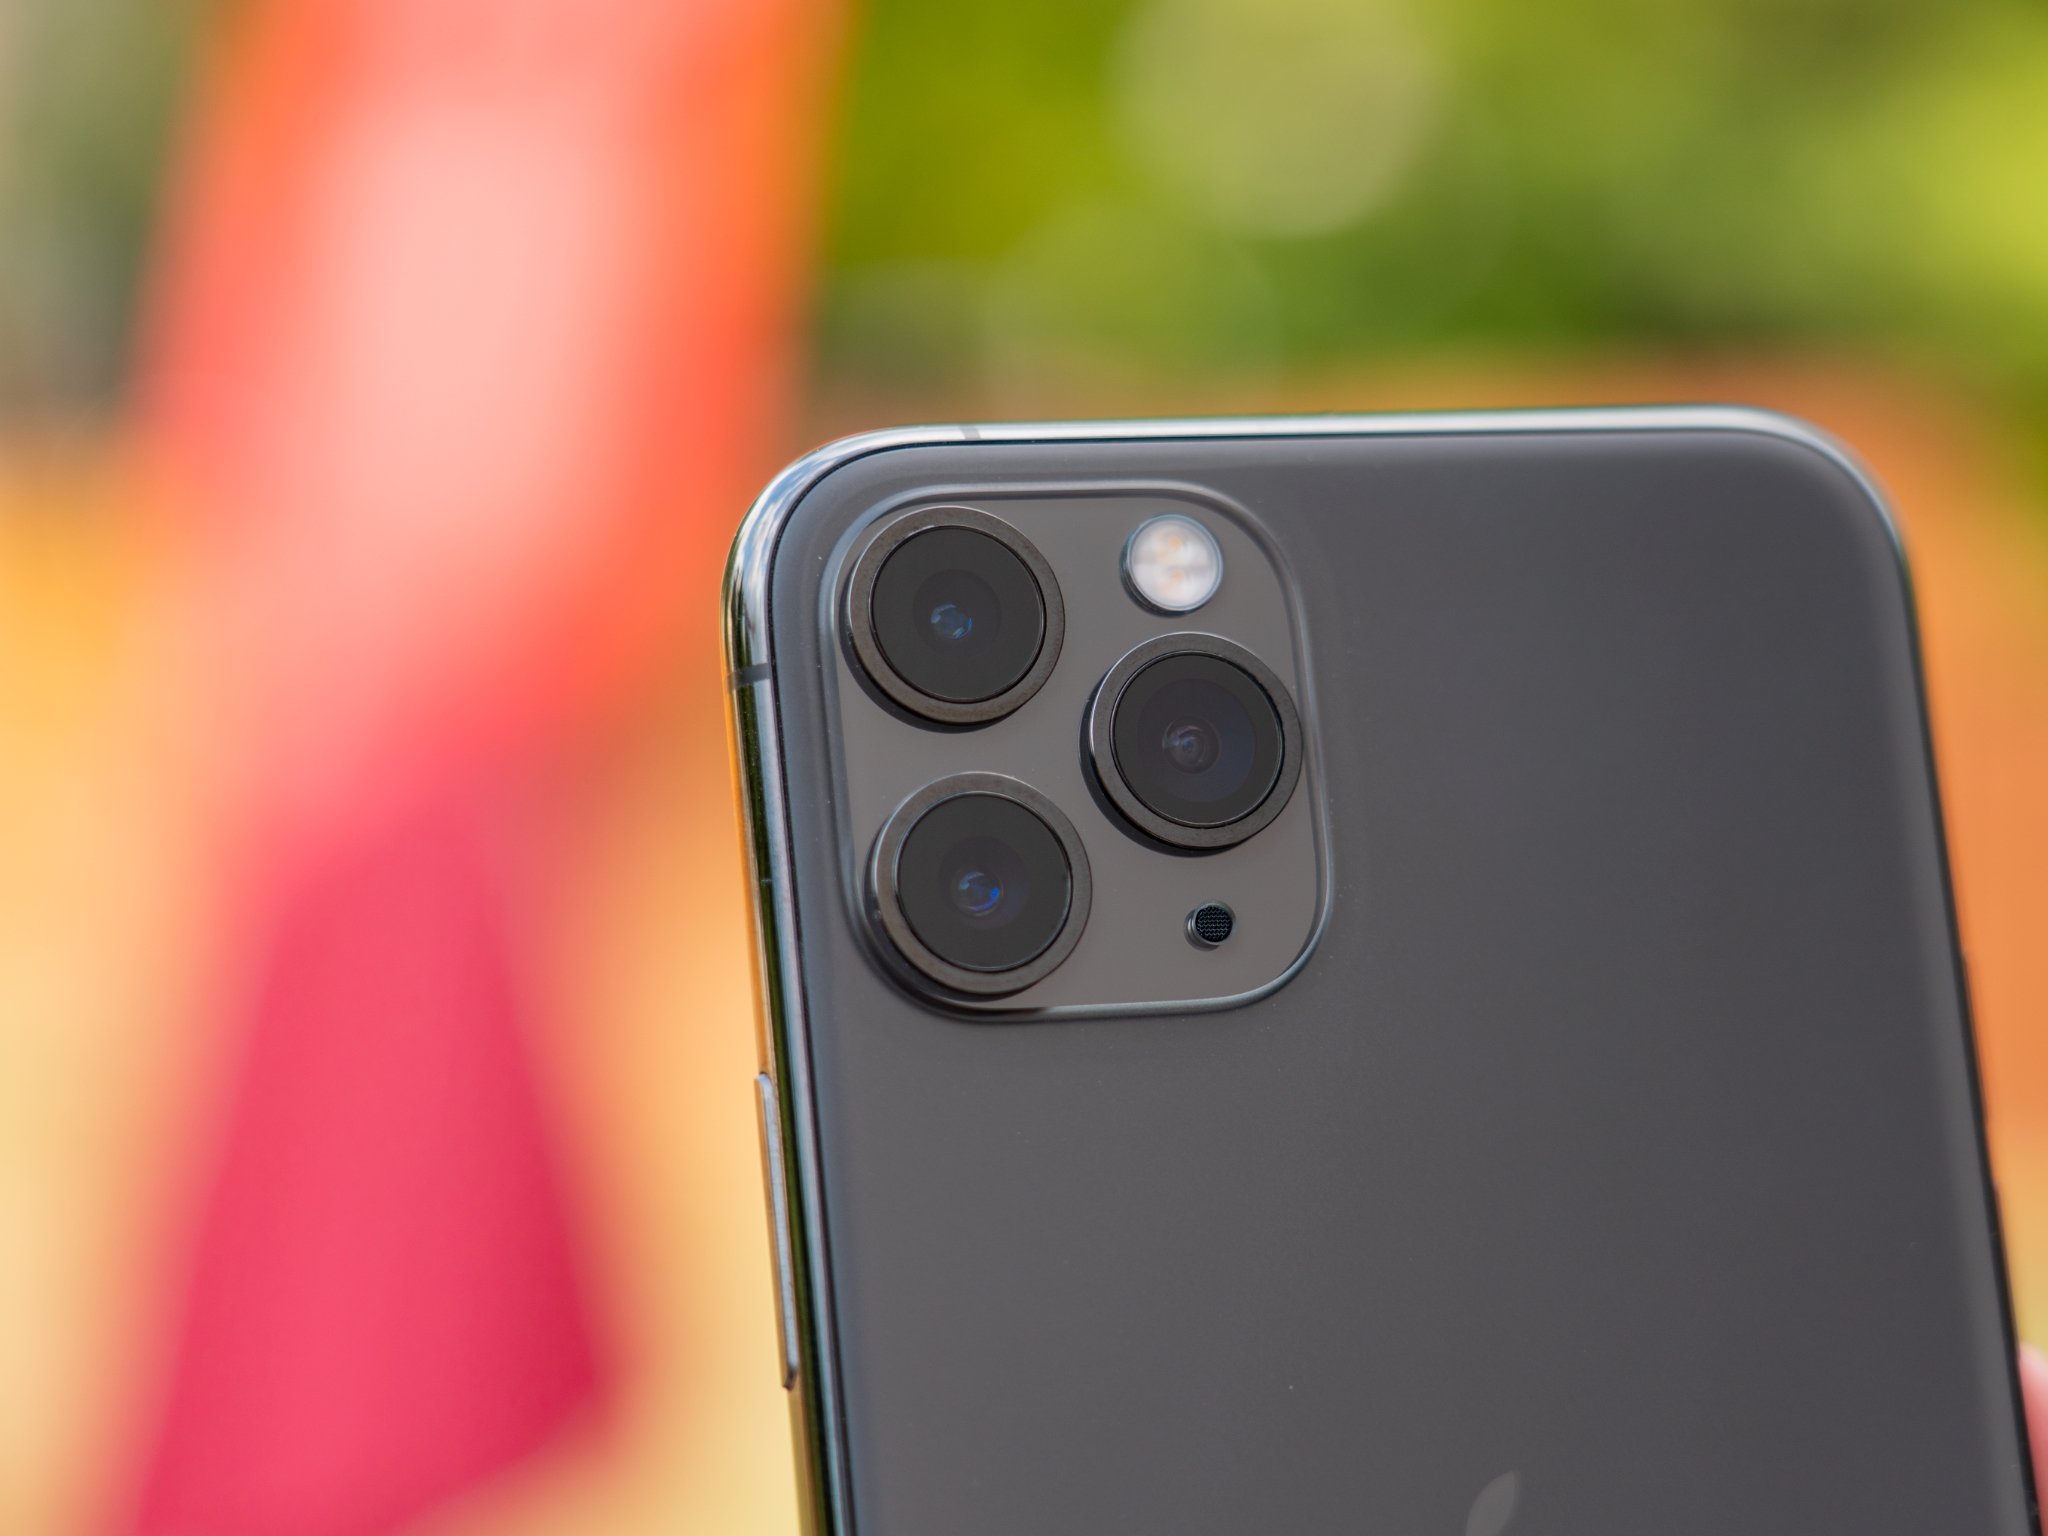 How to use the camera on the iPhone 11 and iPhone 11 Pro